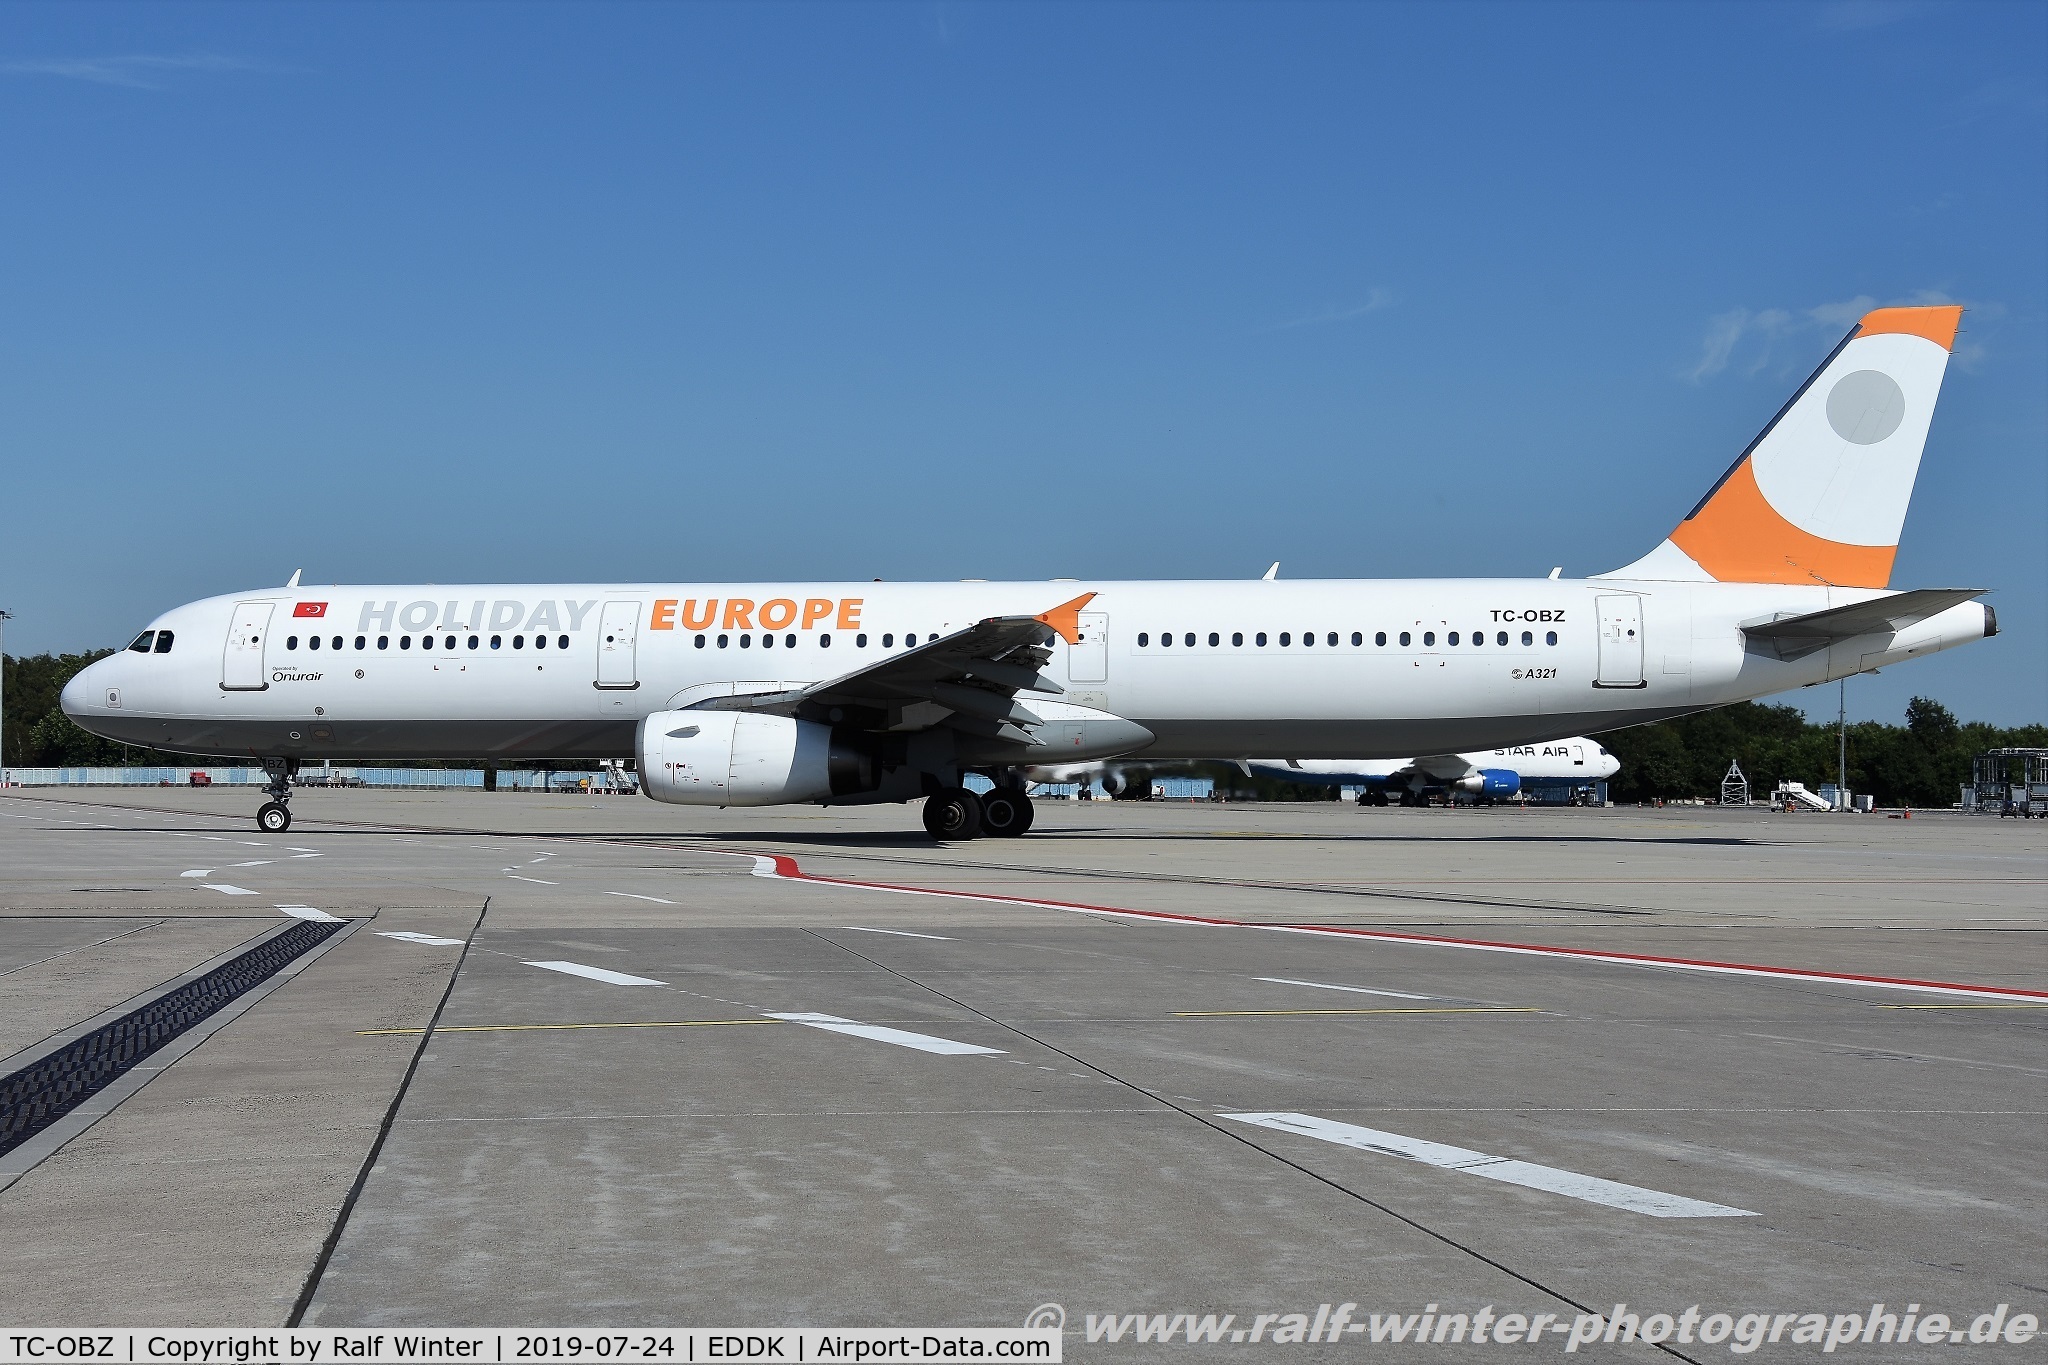 TC-OBZ, 1998 Airbus A321-231 C/N 0811, Airbus A321-231 - 5Q HES Holiday Europe - 811 - TC-OBZ - 24.07.2019 - CGN